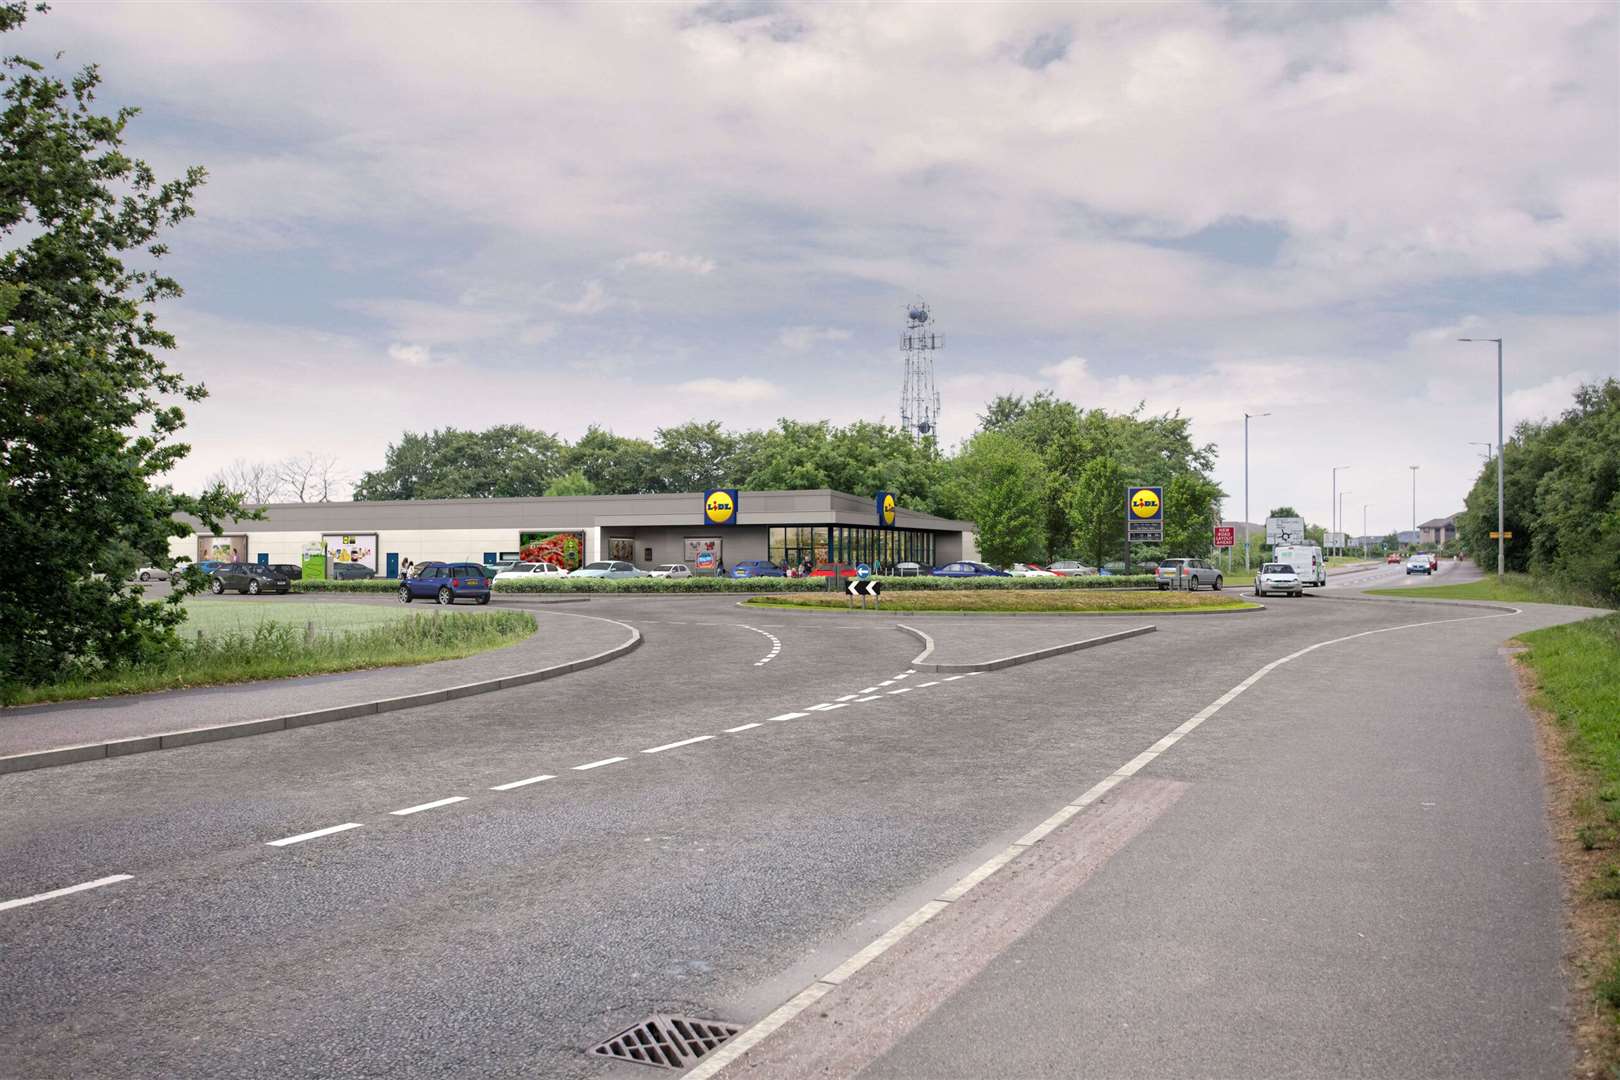 An artist's impression of a Lidl store, used as part of the supermarket's community consultation for plans to build near Inshes roundabout.